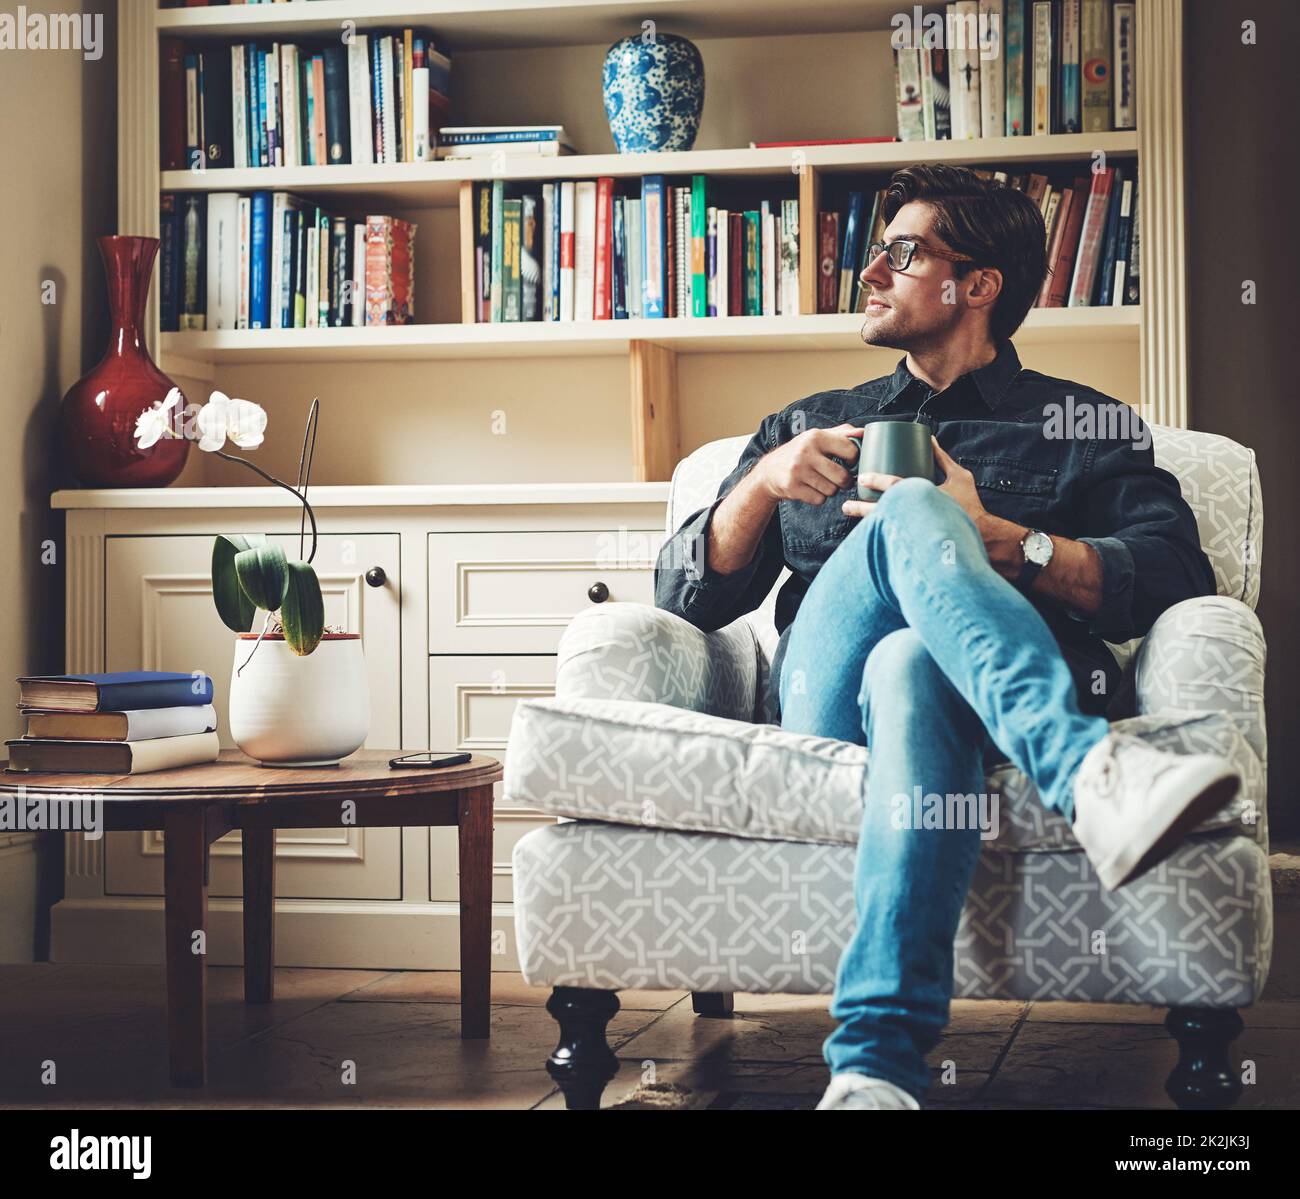 New possibilities arise every new day. Shot of a handsome young businessman drinking coffee while sitting on a couch in his office at home. Stock Photo